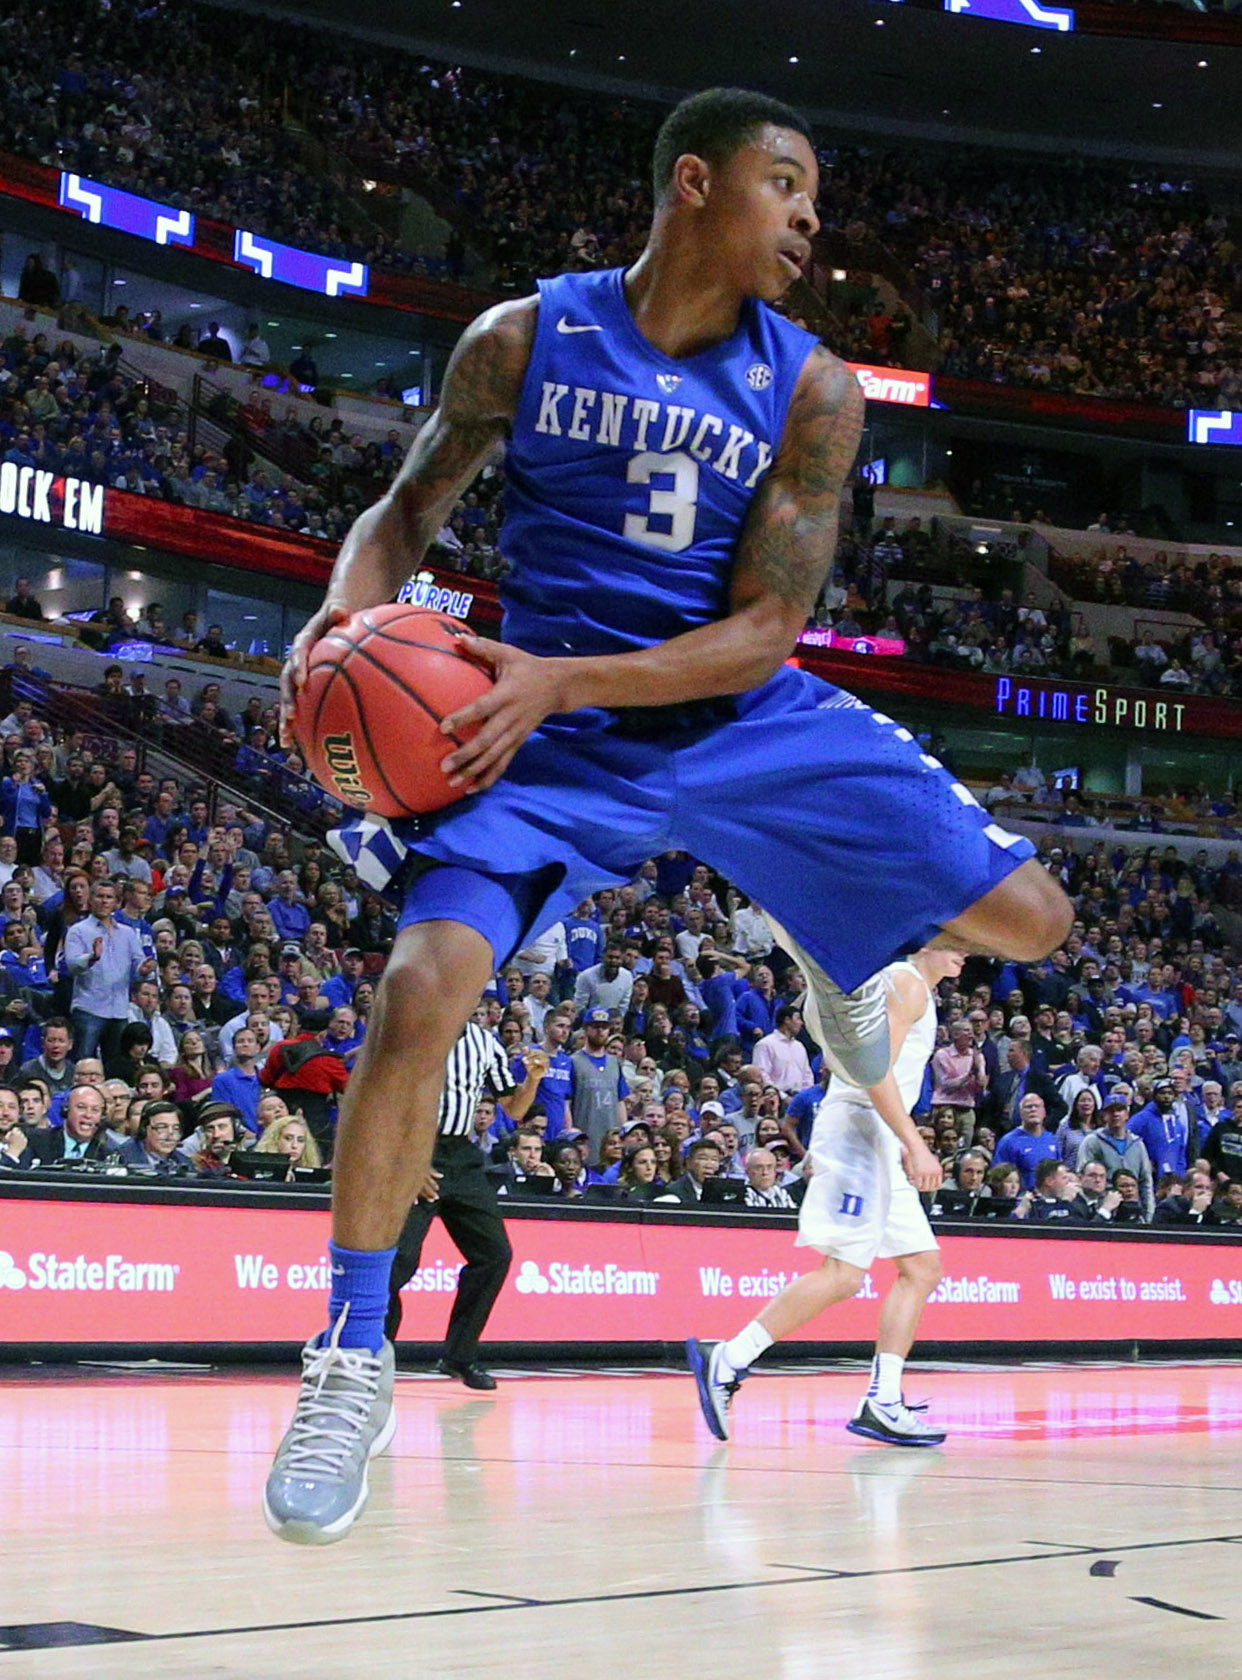 Nov 17, 2015; Chicago, IL, USA; Kentucky Wildcats guard Tyler Ulis (3) grabs a rebound during the first half against the Duke Blue Devils at the United Center. Mandatory Credit: Dennis Wierzbicki-USA TODAY Sports